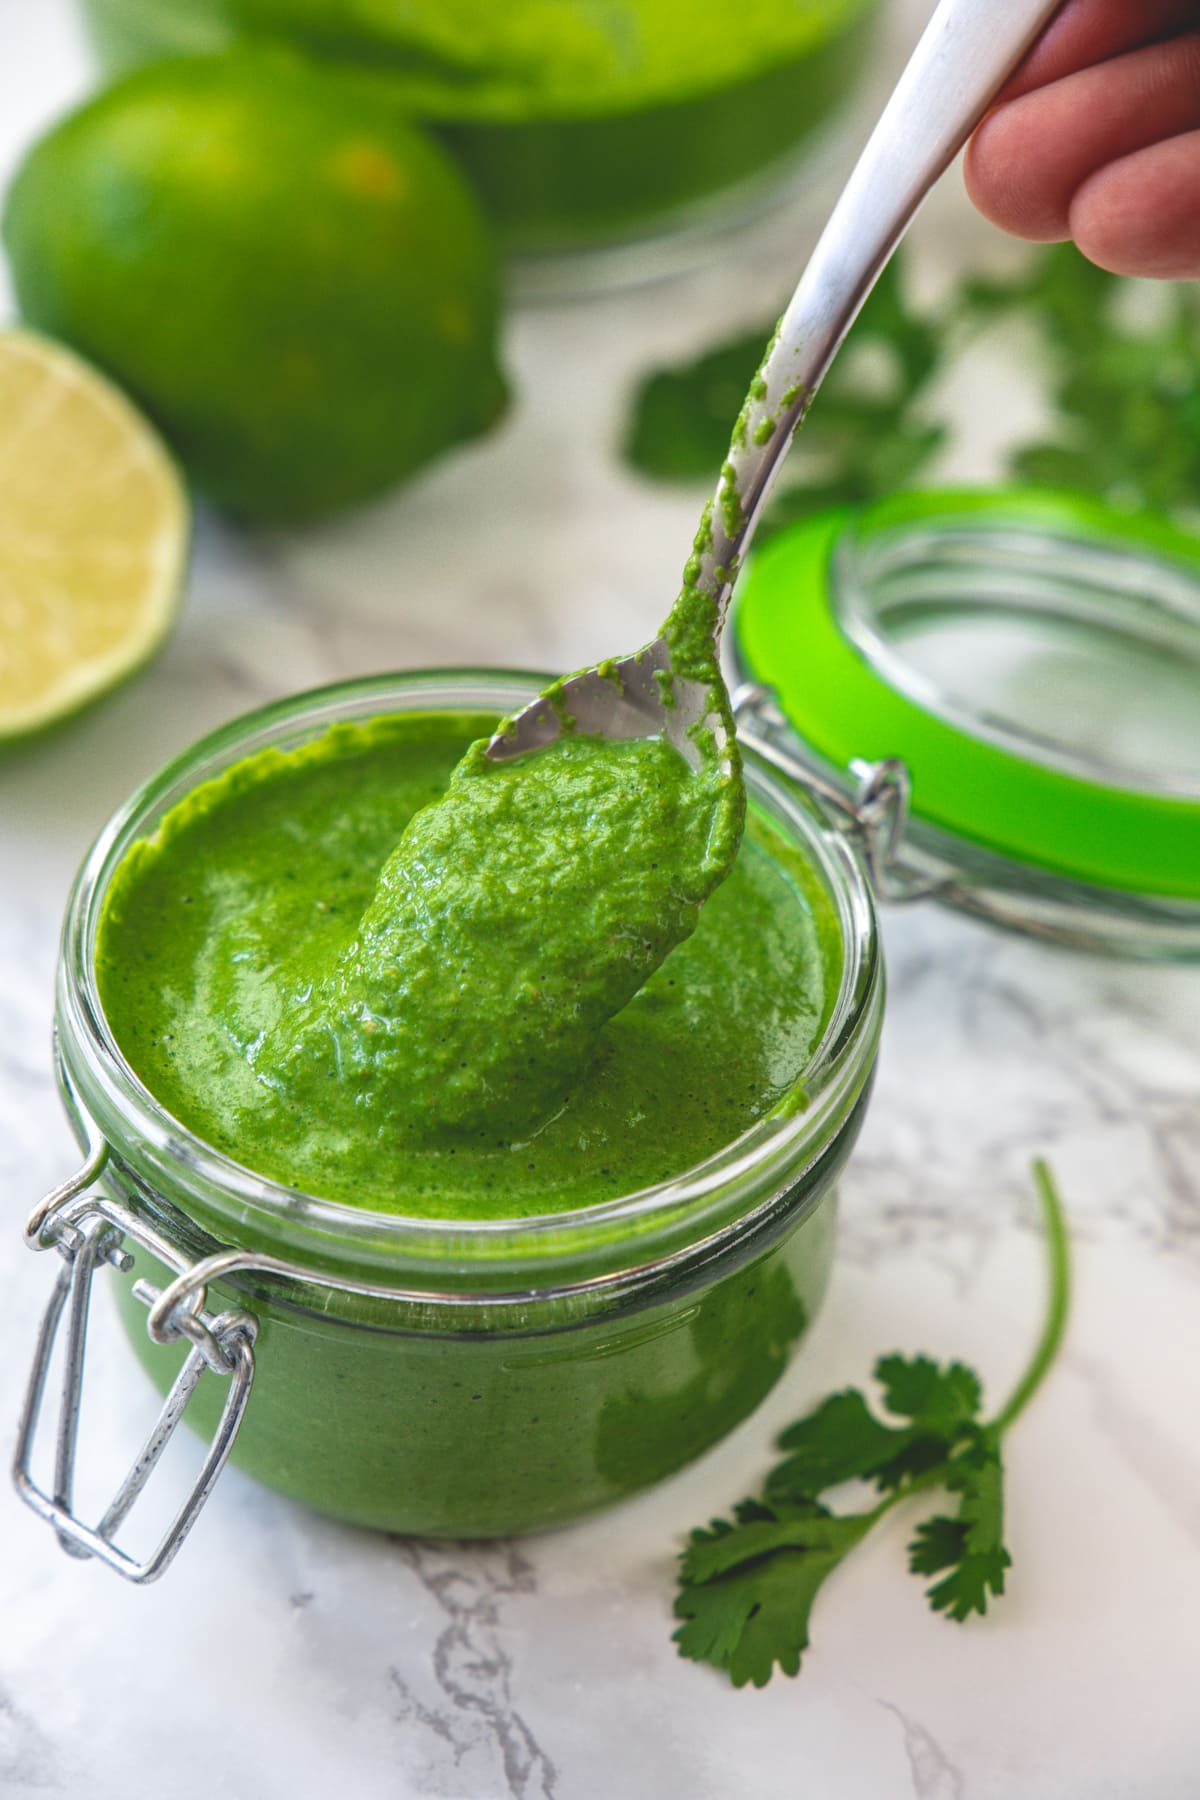 Spoonful of cilantro chutney taking from the jar.